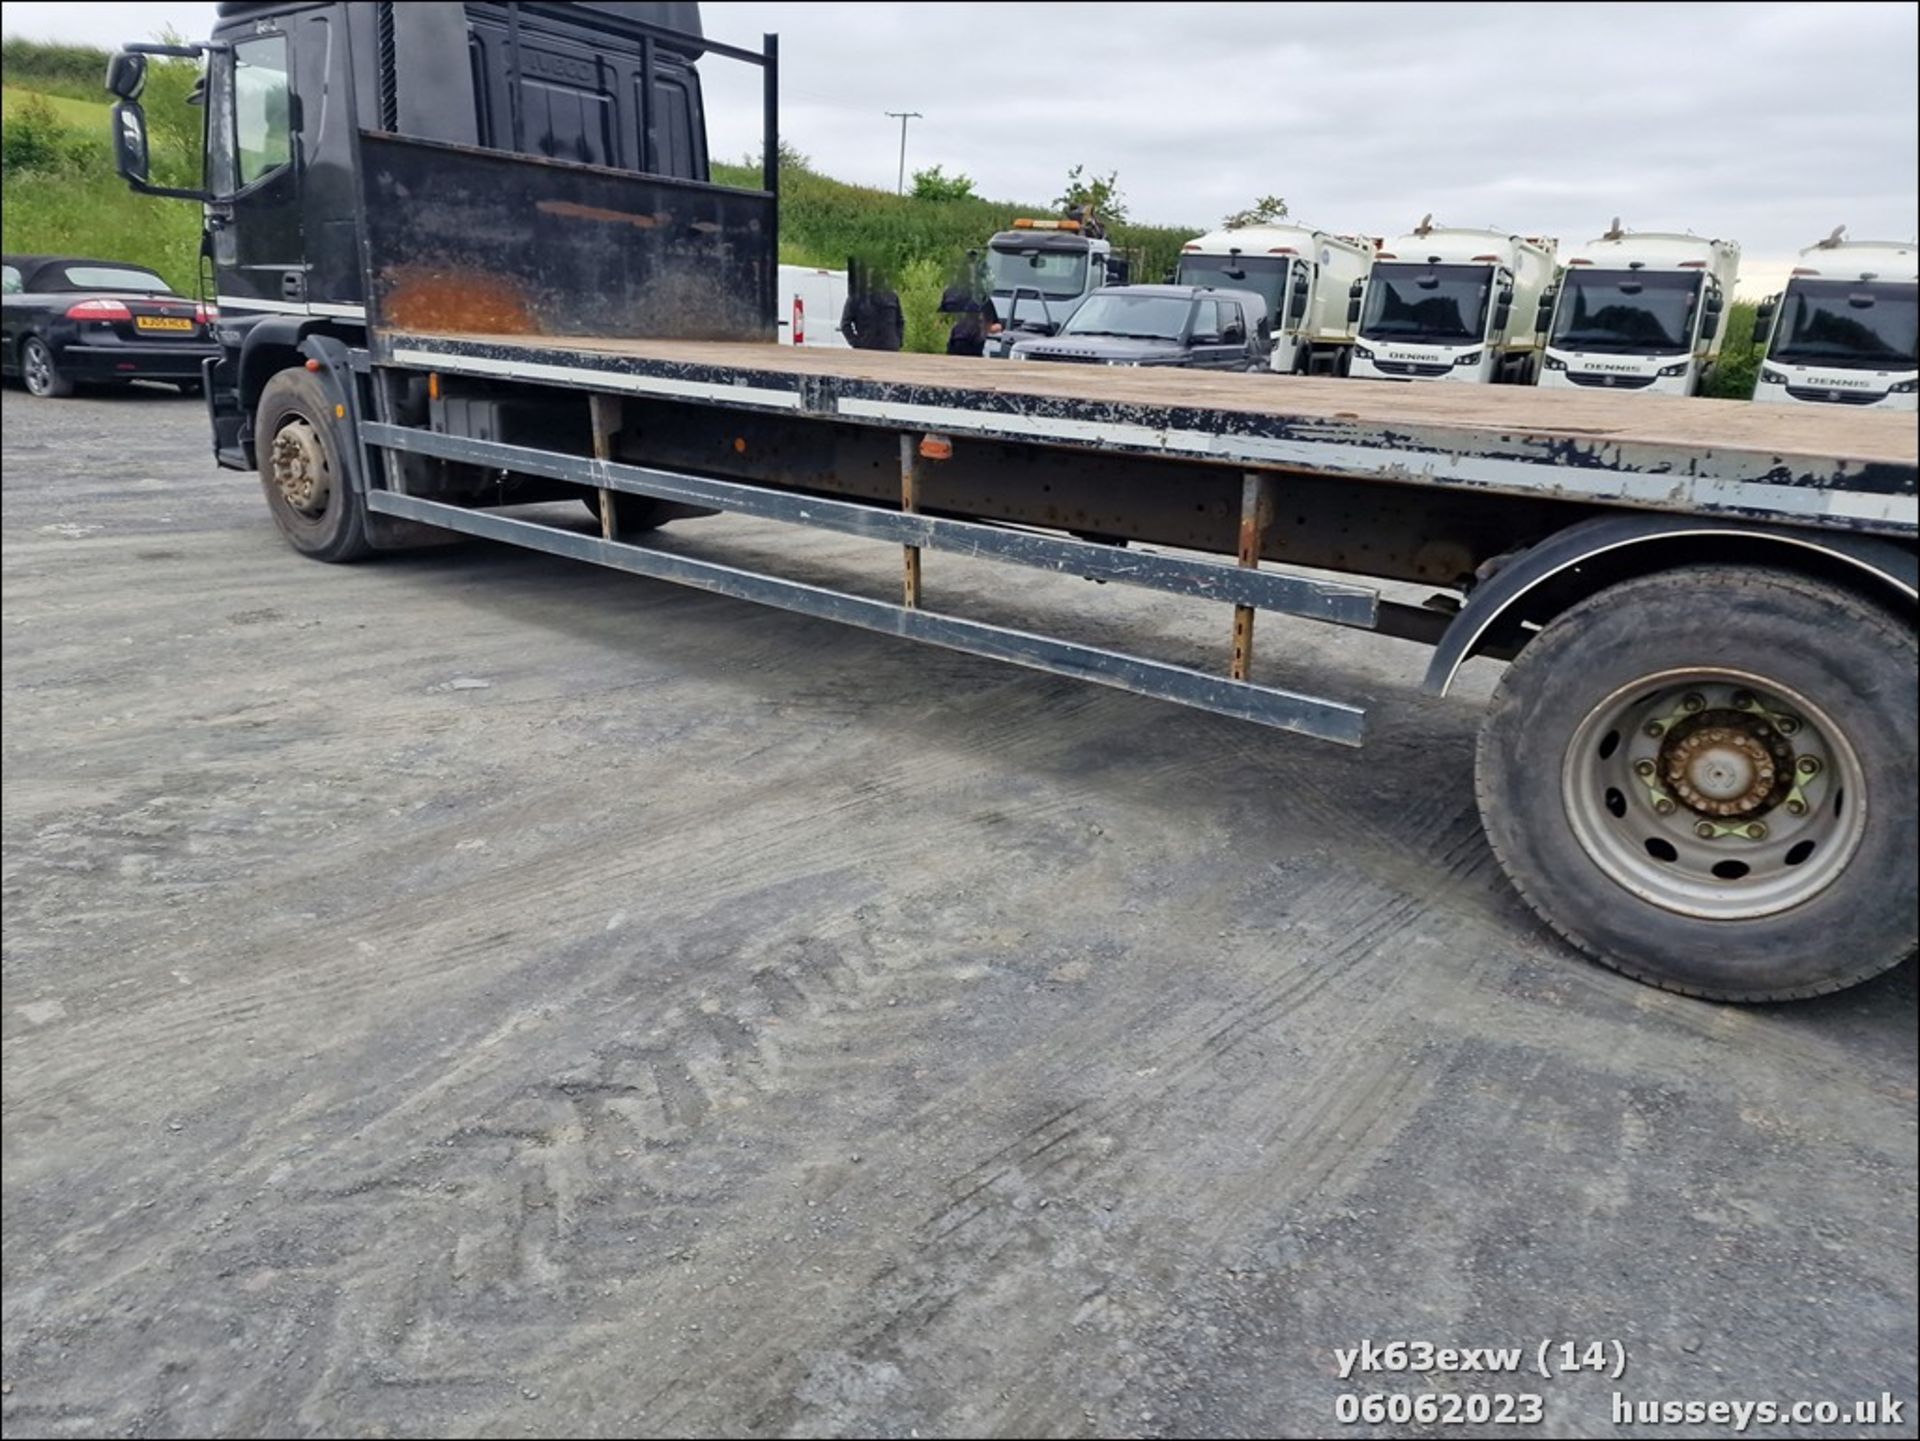 13/63 IVECO EUROCARGO (MY 2008) - 5880cc 2dr Flat Bed (Black) - Image 14 of 21